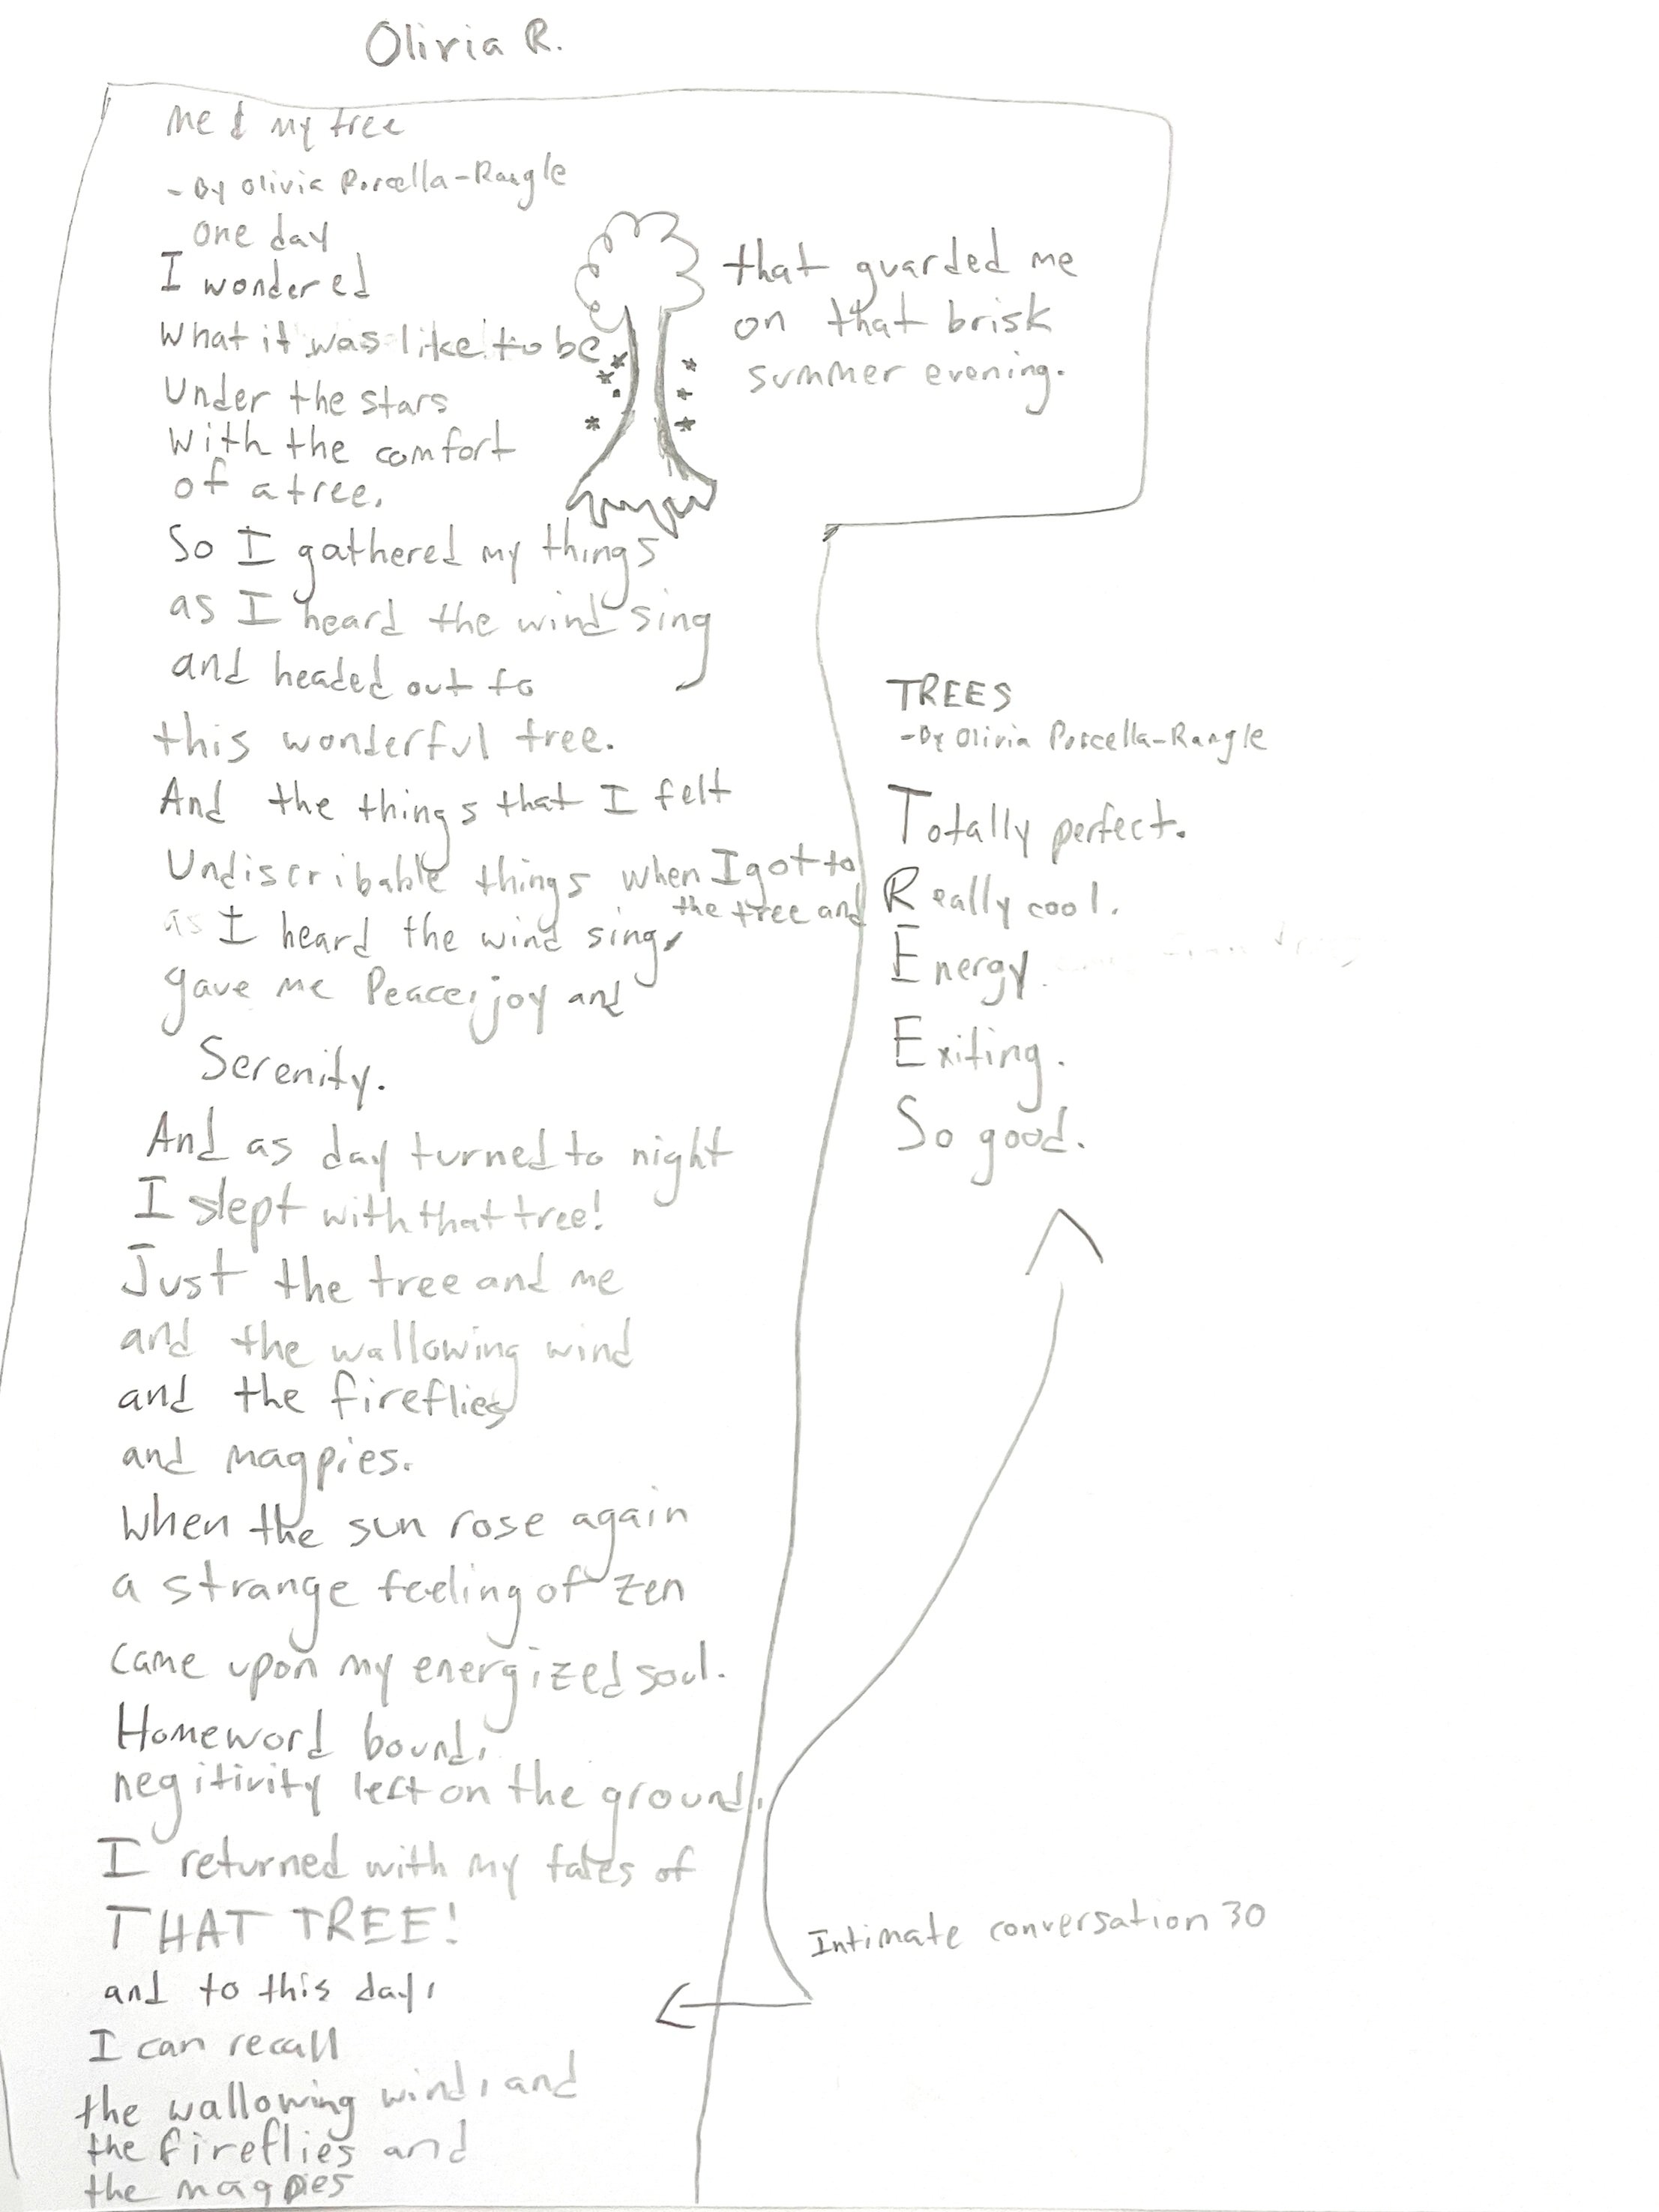 Poem written by Olivia, Age 9, Inspired by Jane Olin's Photograph "Intimate Conversation 30"